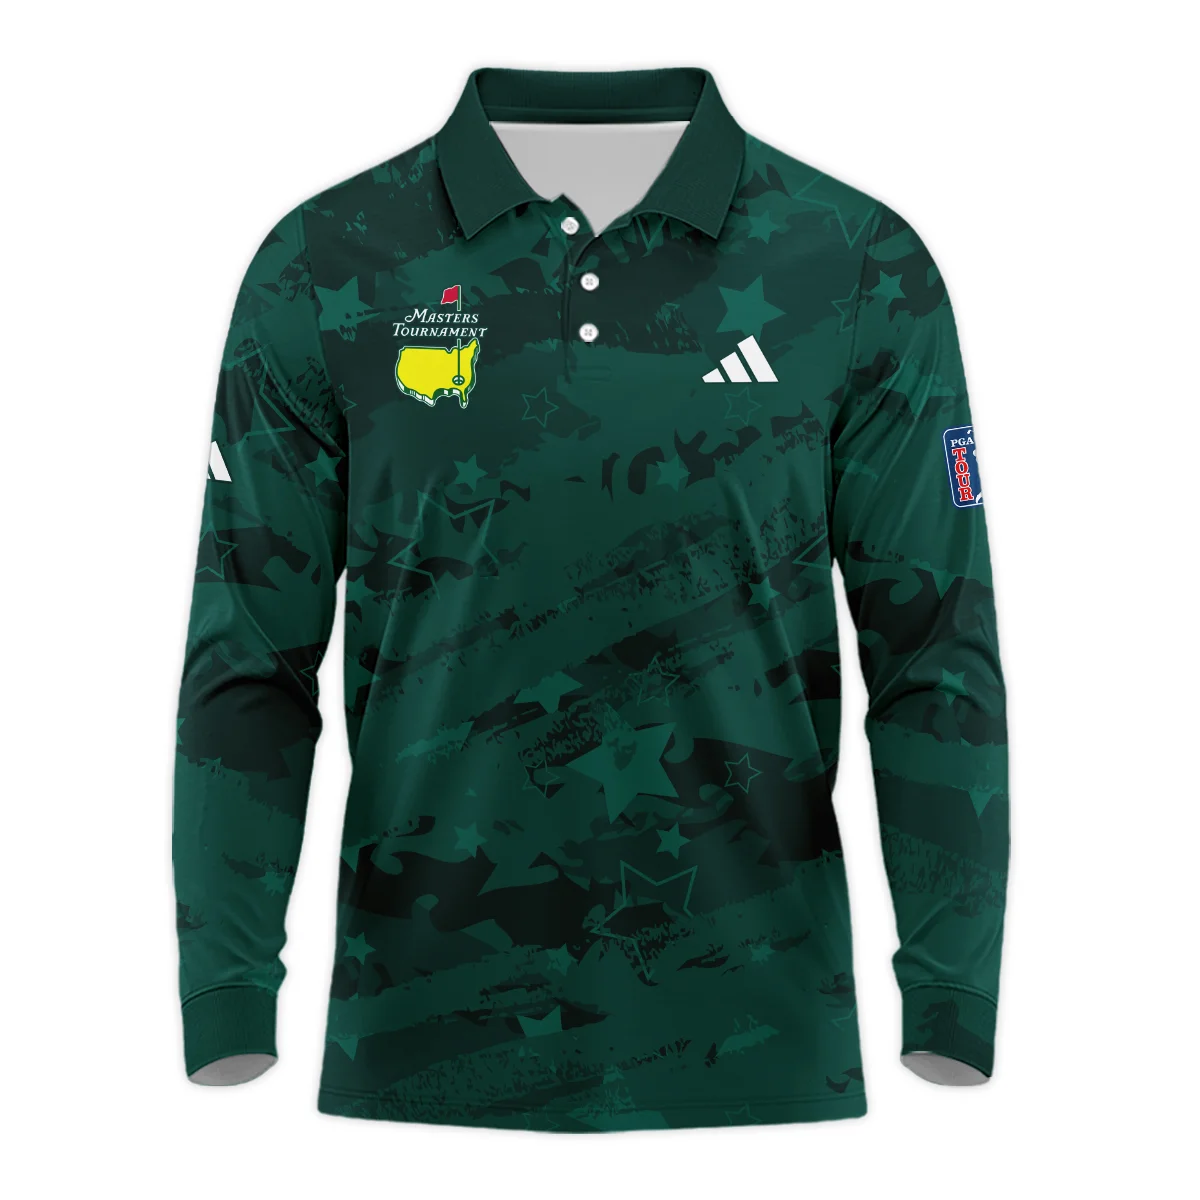 Dark Green Stars Pattern Grunge Background Masters Tournament Adidas Vneck Long Polo Shirt Style Classic Long Polo Shirt For Men